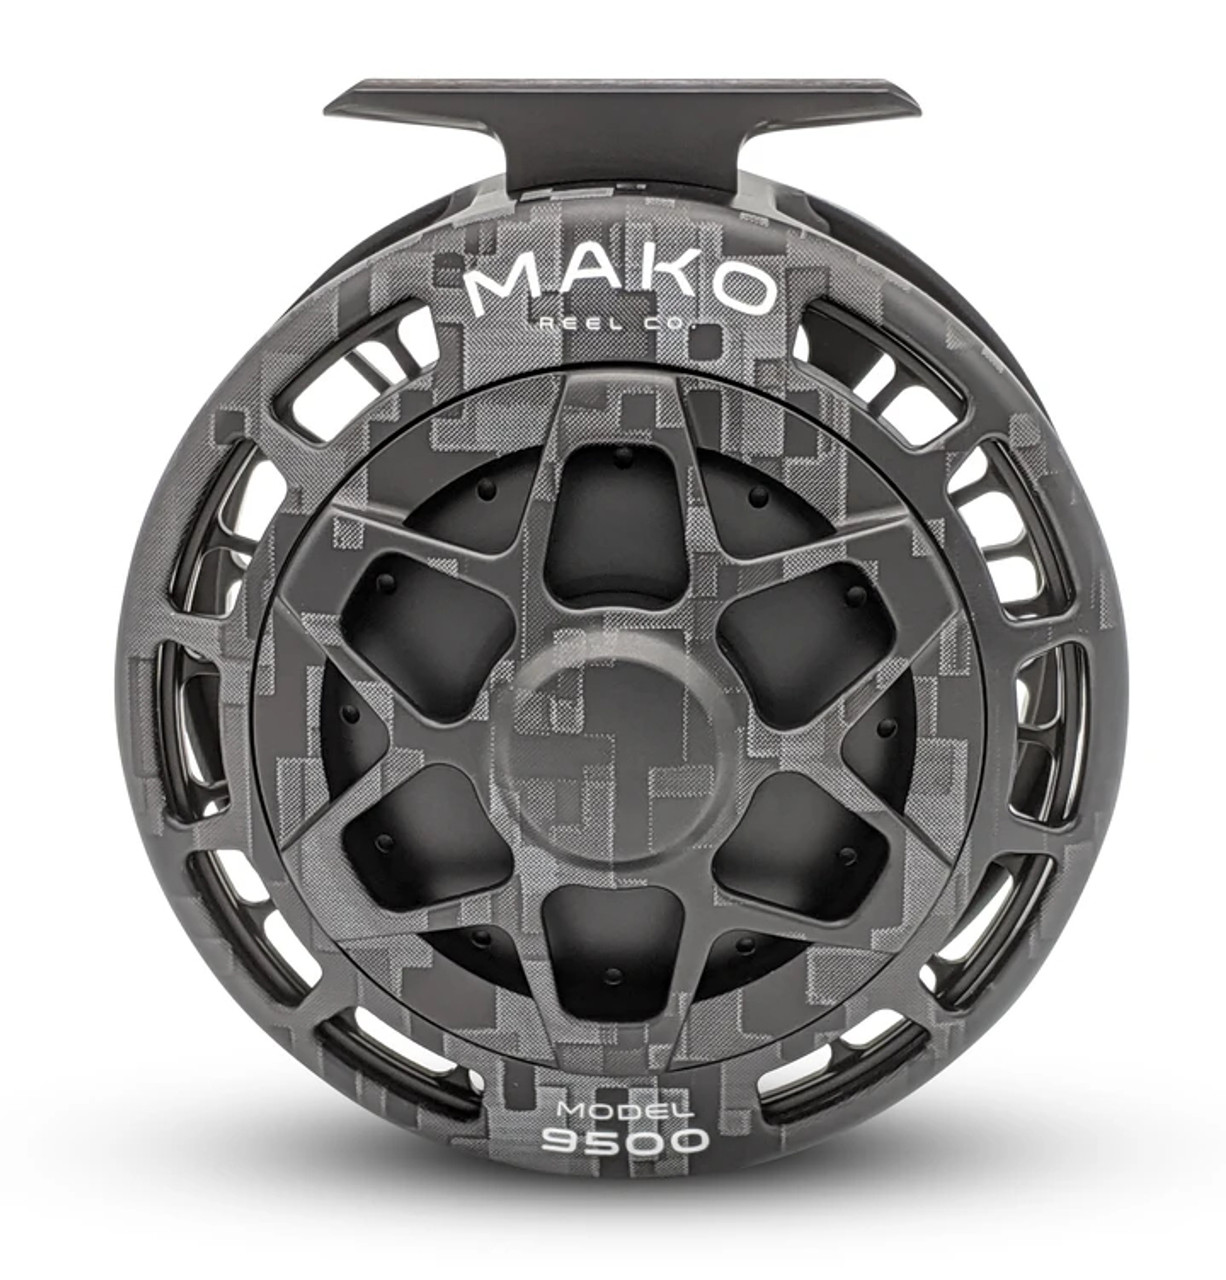 Mako Digi Camo Reel 9500-810 LH53222 - Gordy & Sons Outfitters